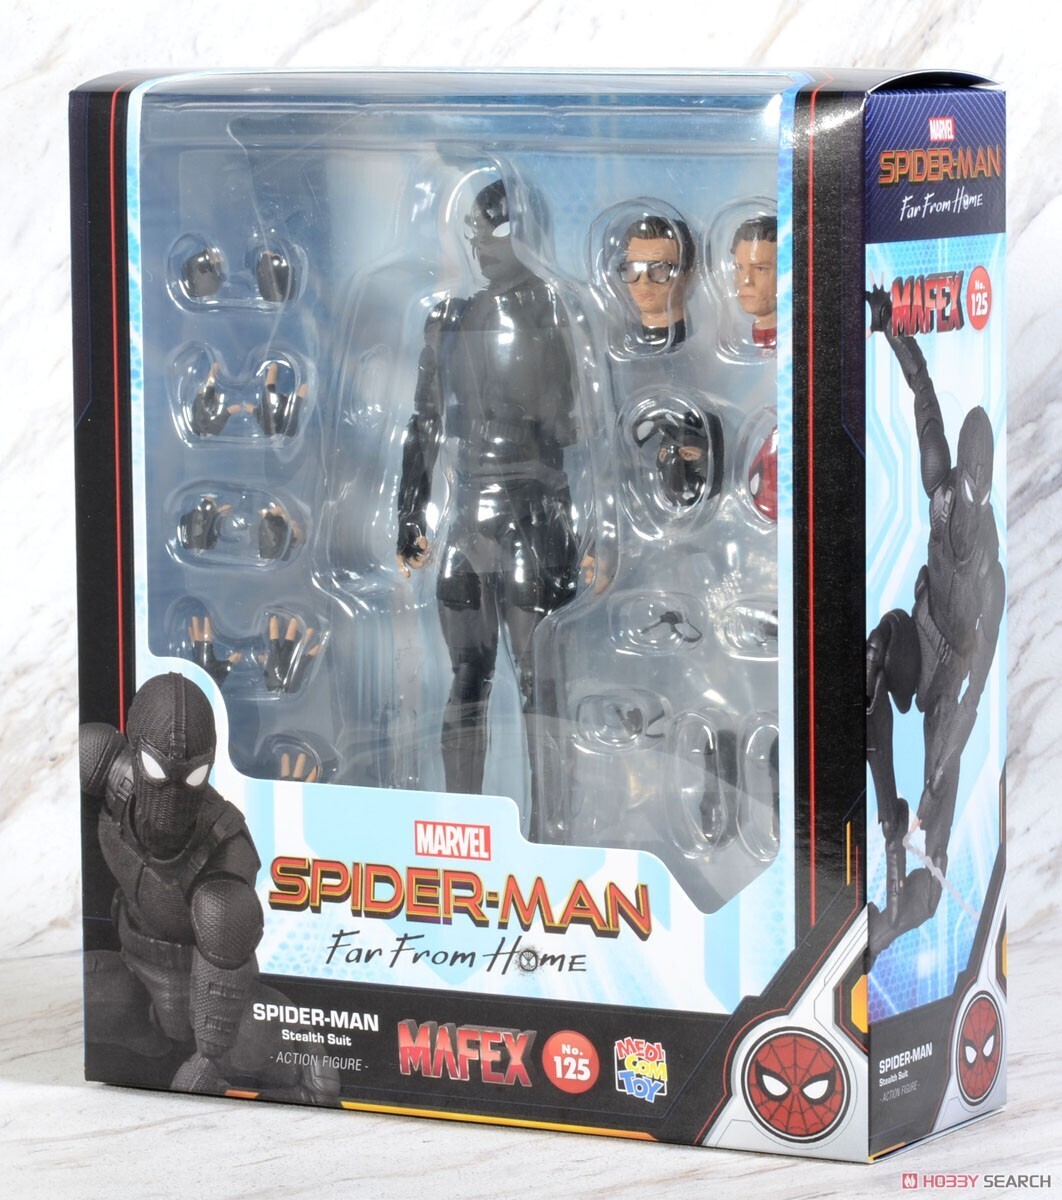 Medicom MAFEX Spider-Man Stealth Suit (Spider-Man Far From Home) No. 125